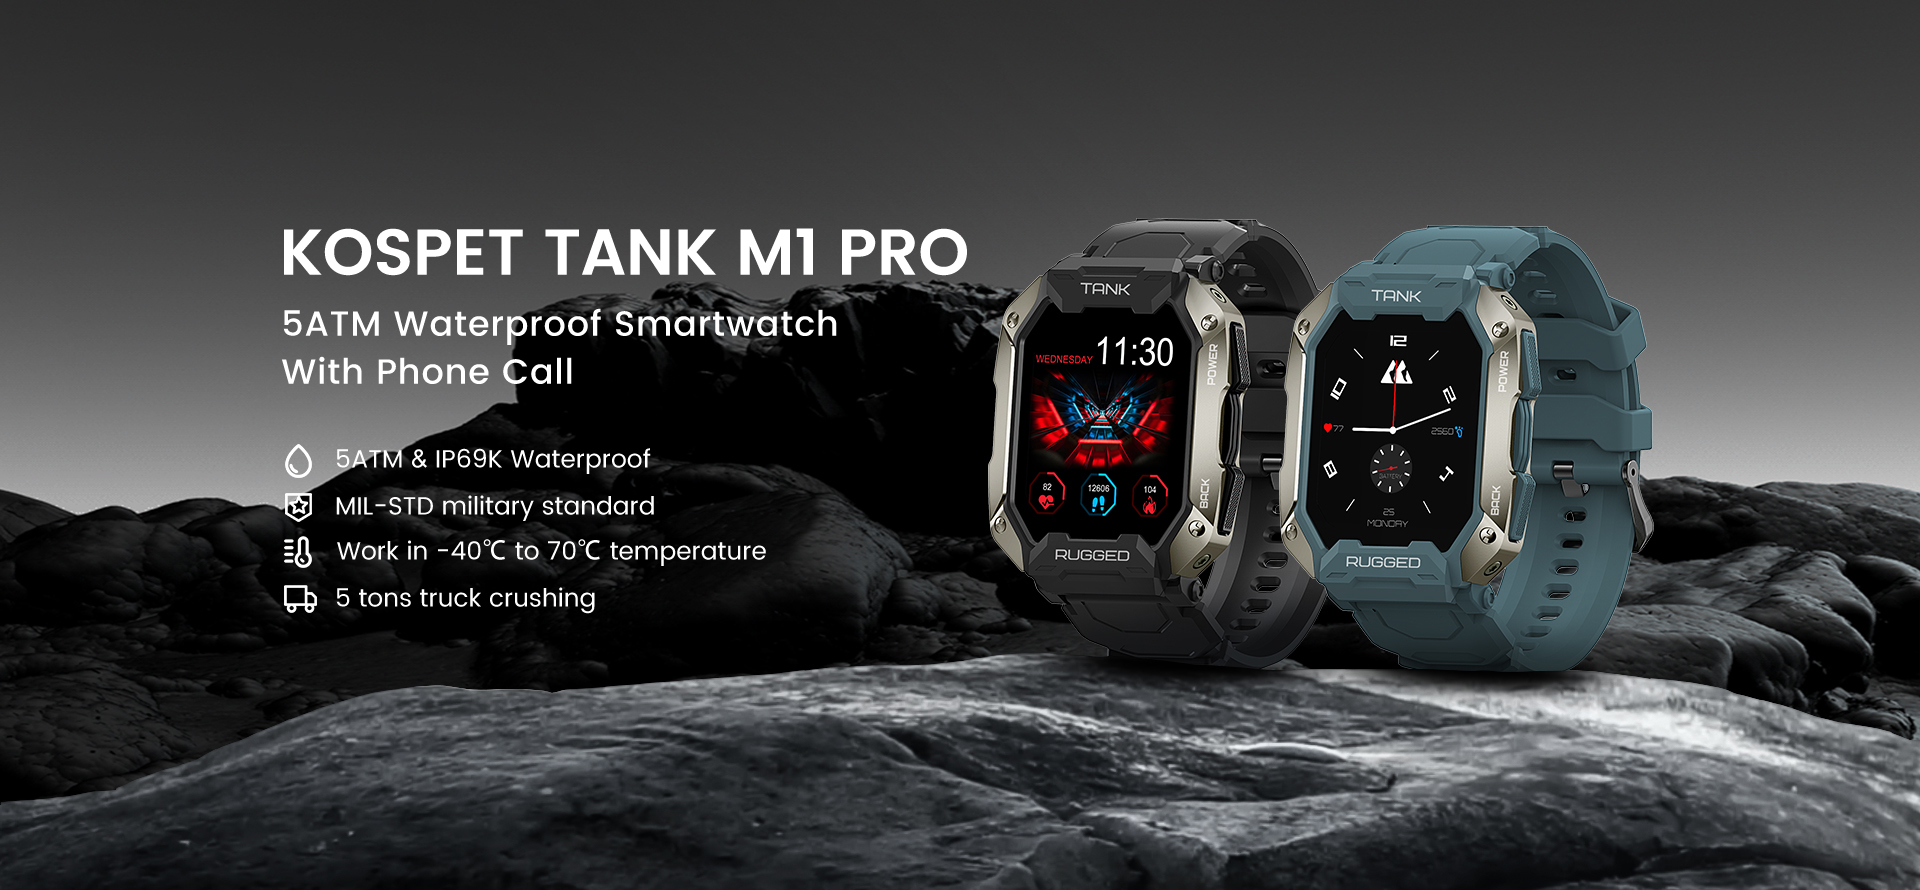 KOSPET-TANK-M1-Pro-Three-proof-Rugged-Outdoor-Fitness-Tracker-bluetooth-Call-24h-Heart-Rate-SpO2-Mon-1968724-1